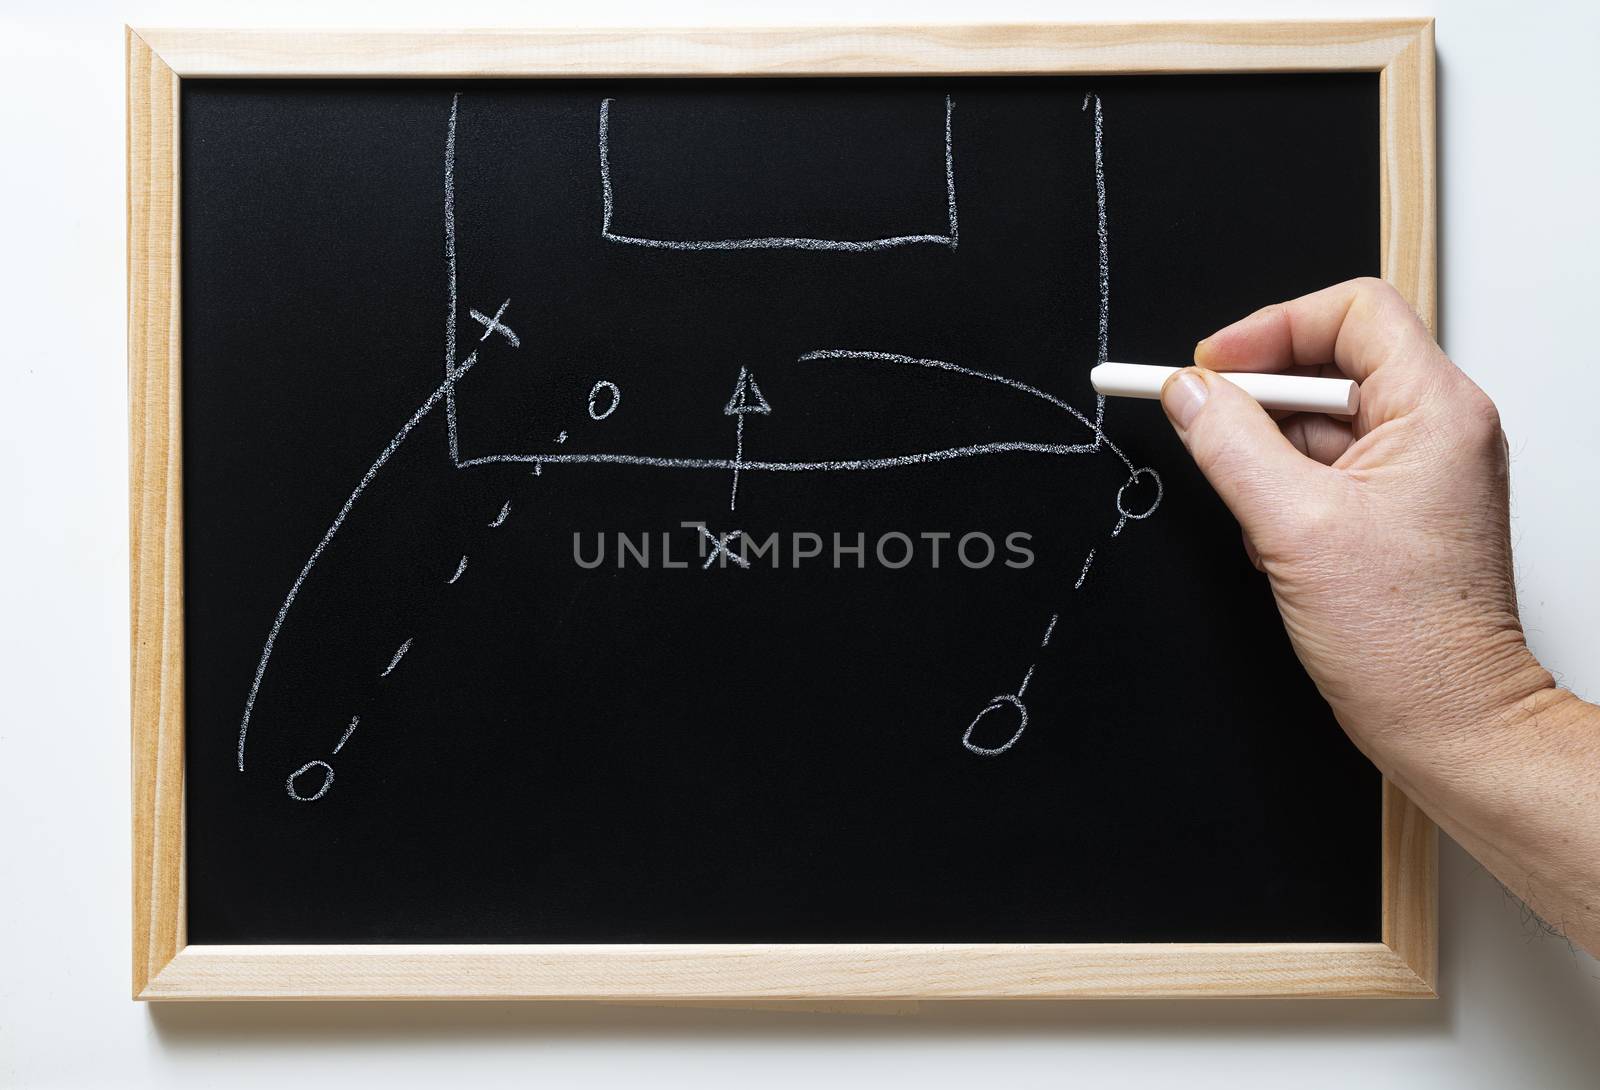 the tactical scheme of football drawn on the blackboard